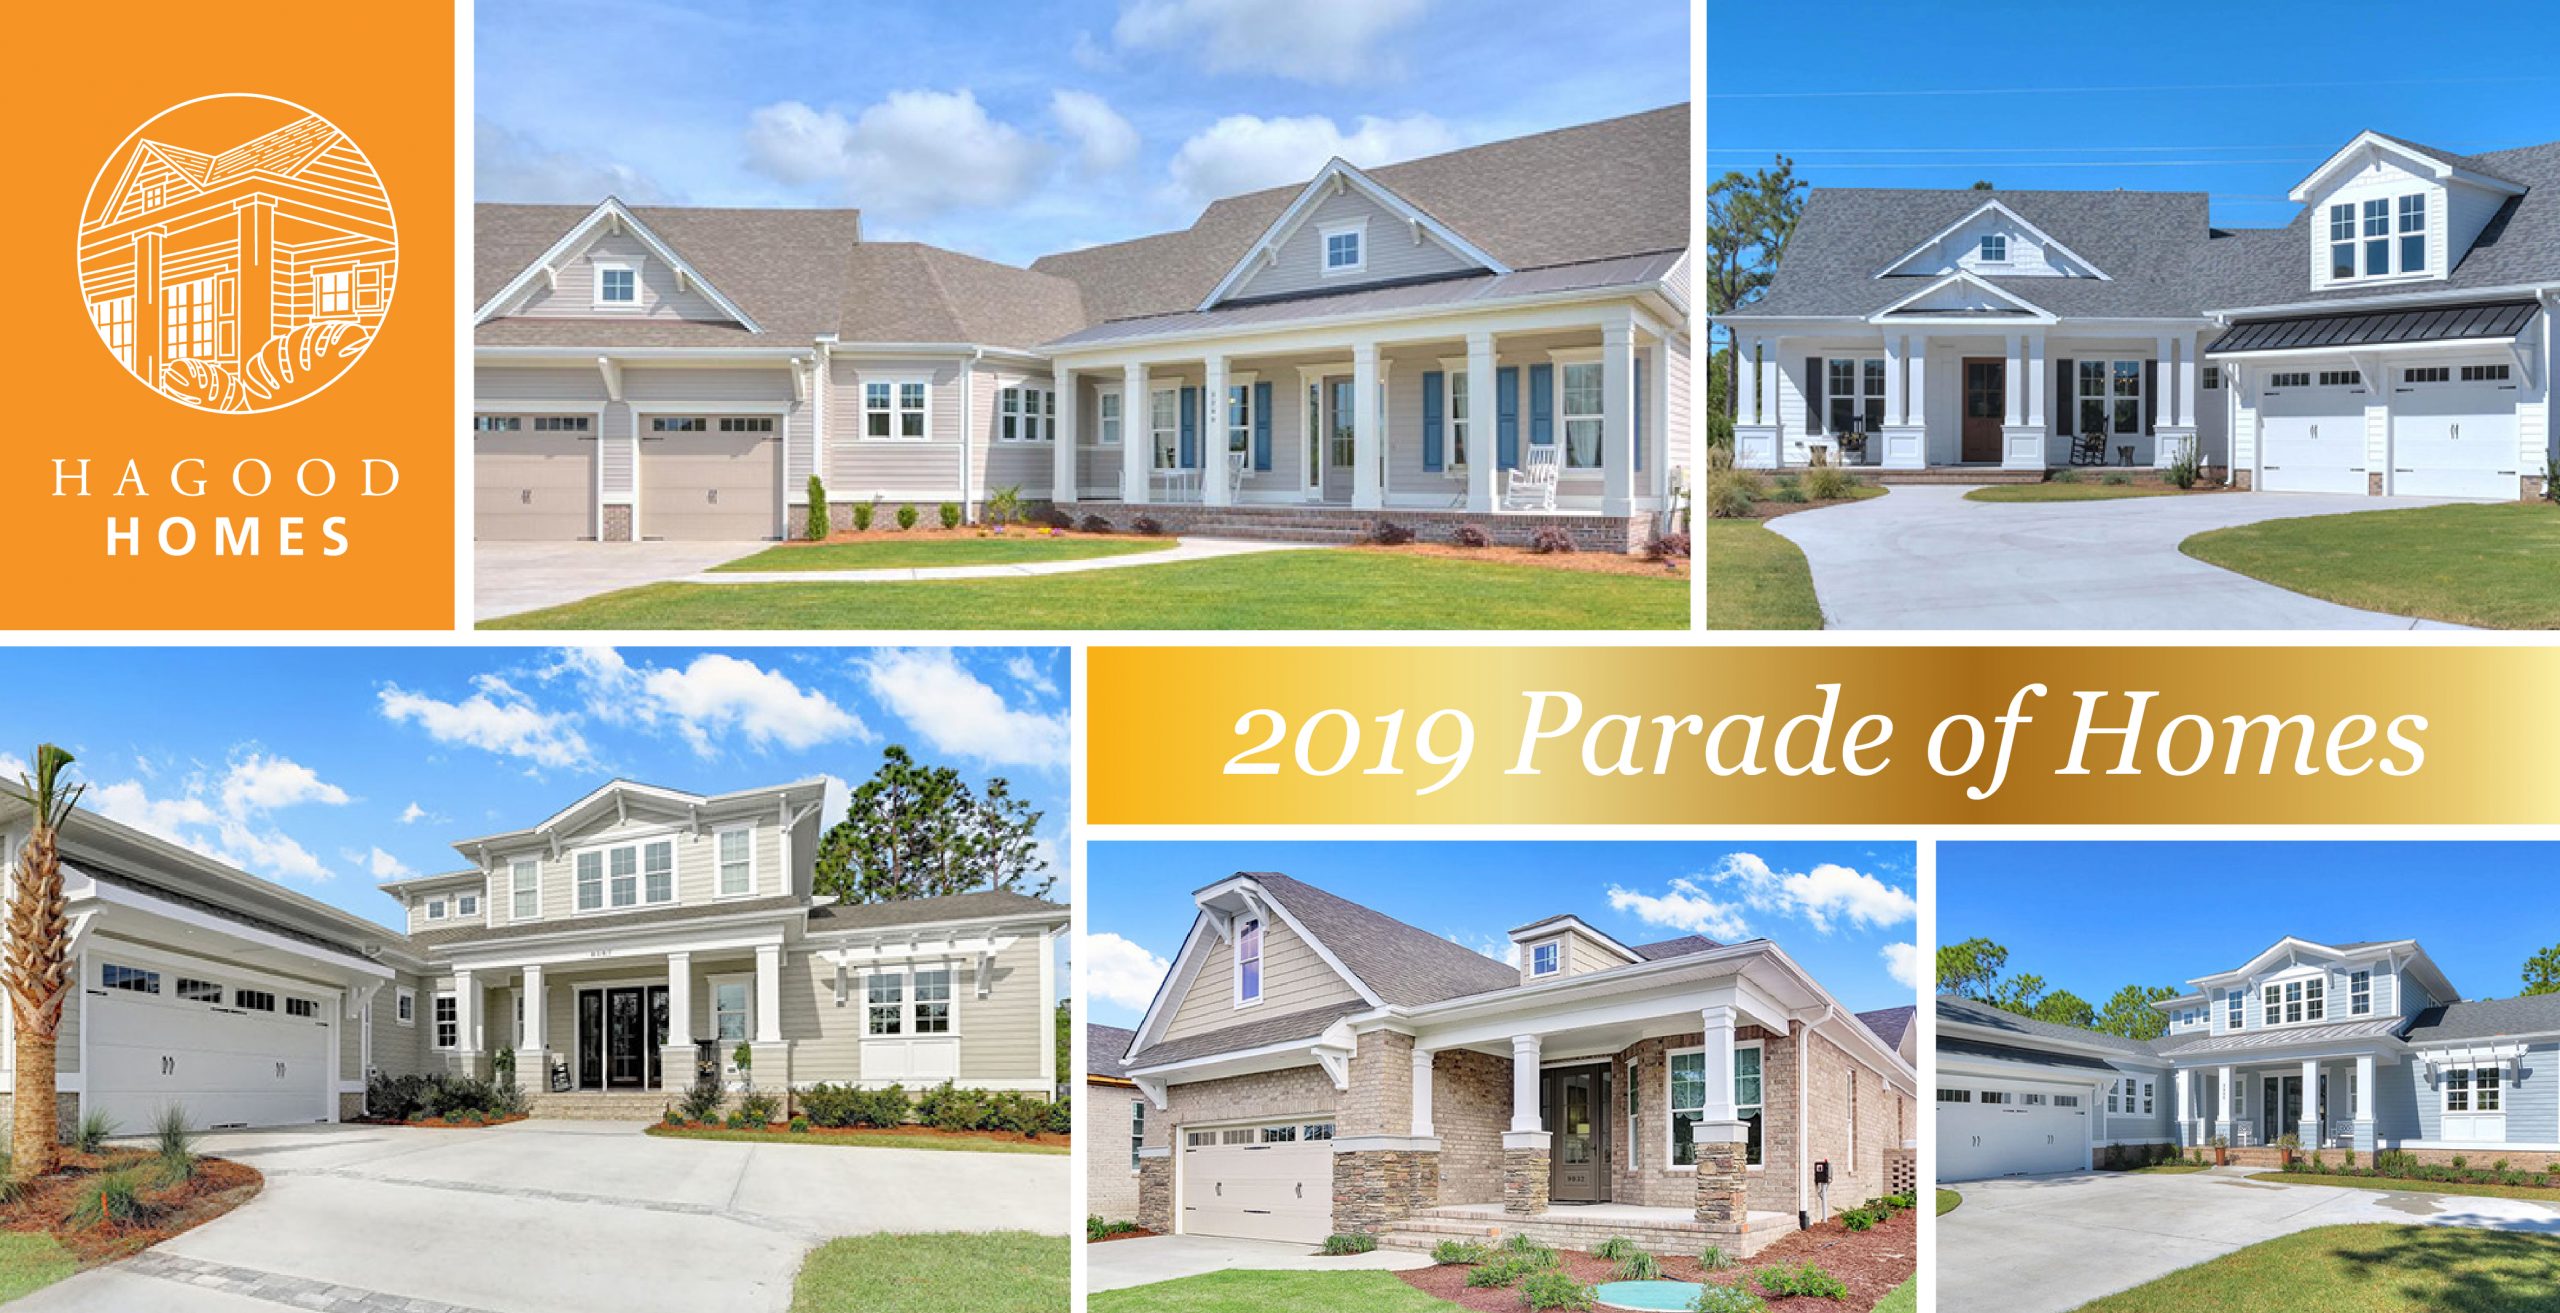 Join us for the 2019 Parade of Homes